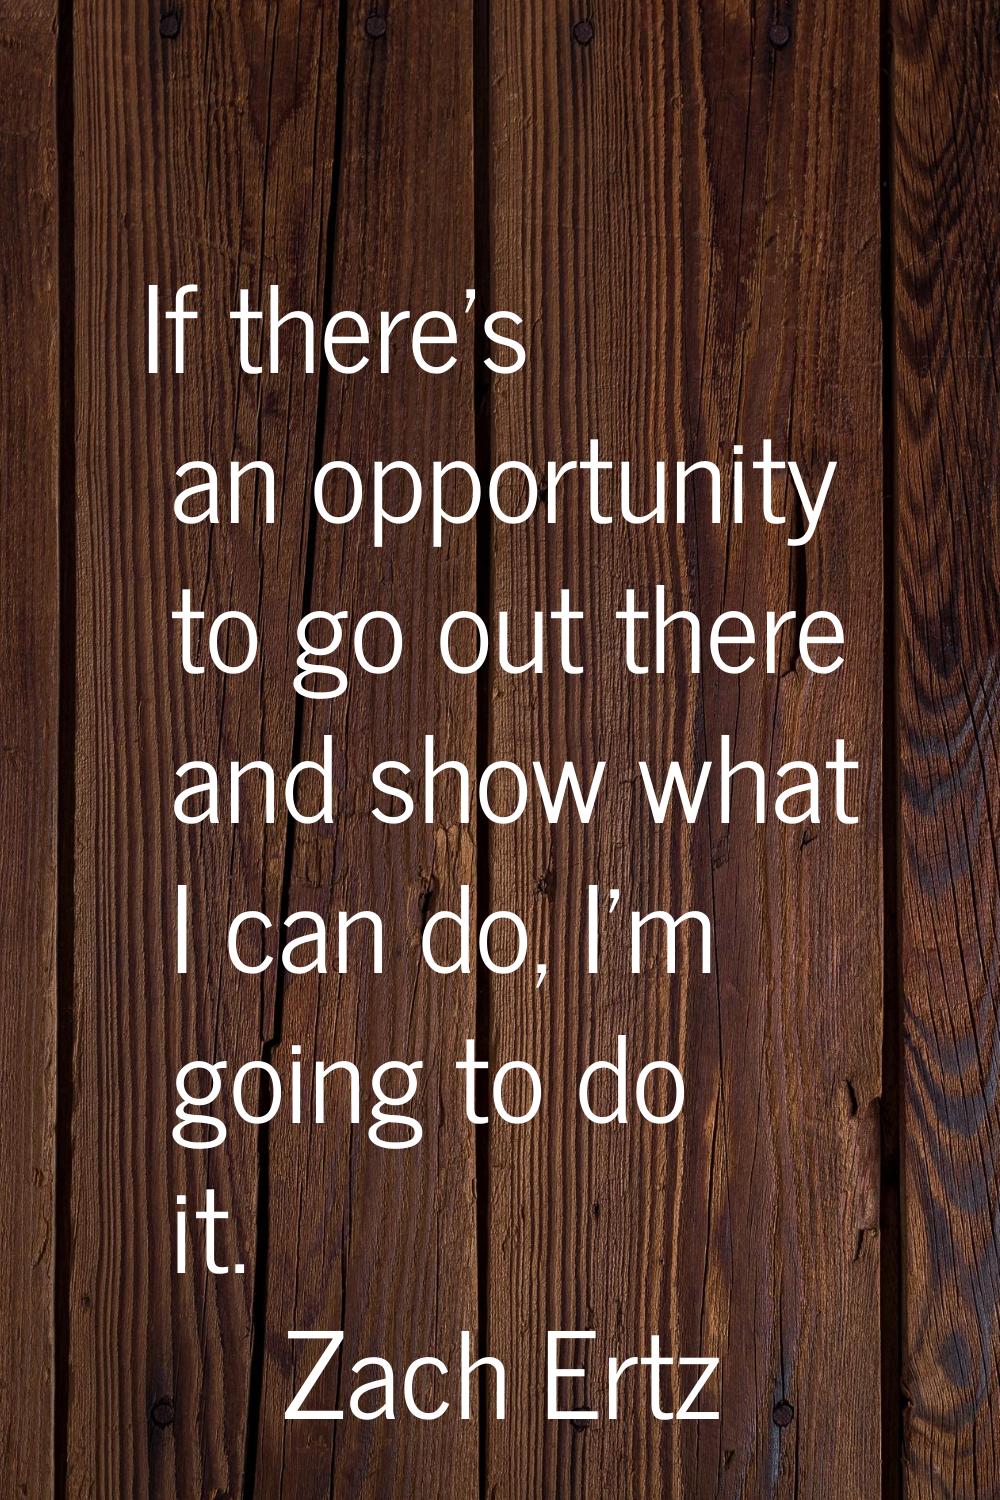 If there's an opportunity to go out there and show what I can do, I'm going to do it.